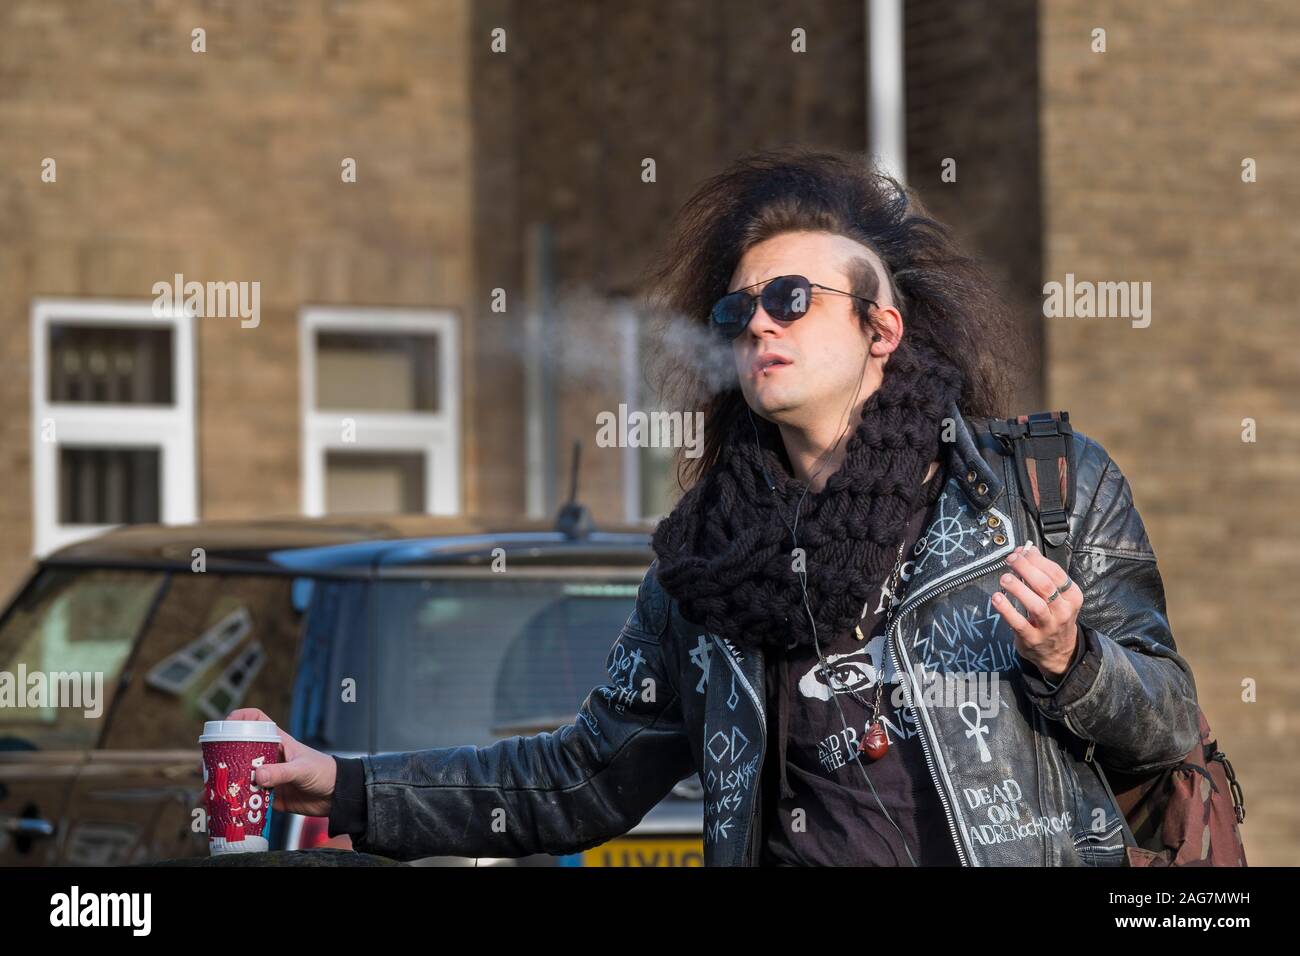 A leather jacketed man wih big hair enjoys a cigarette and a coffee. Stock Photo